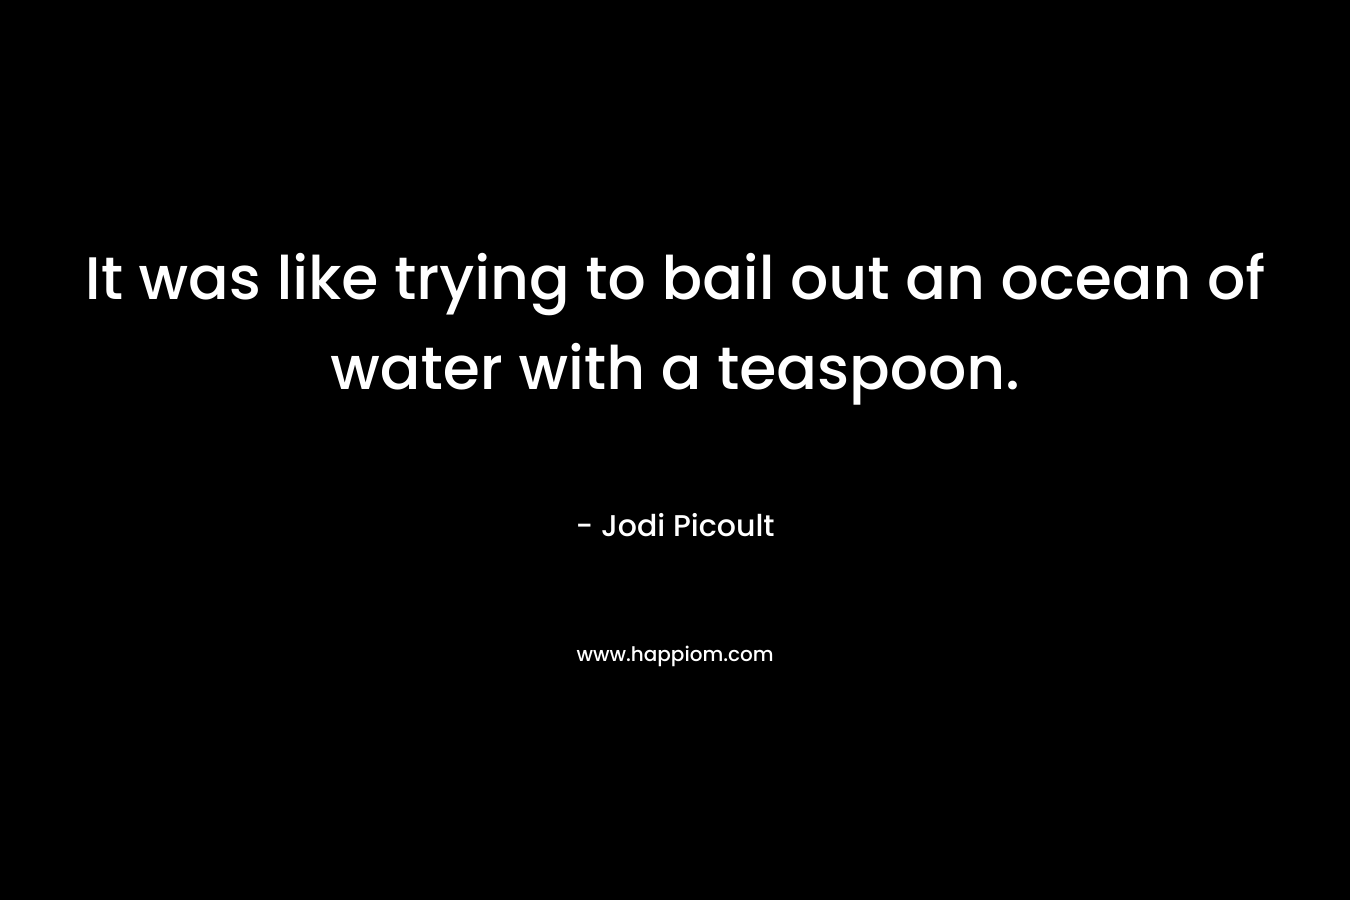 It was like trying to bail out an ocean of water with a teaspoon. – Jodi Picoult